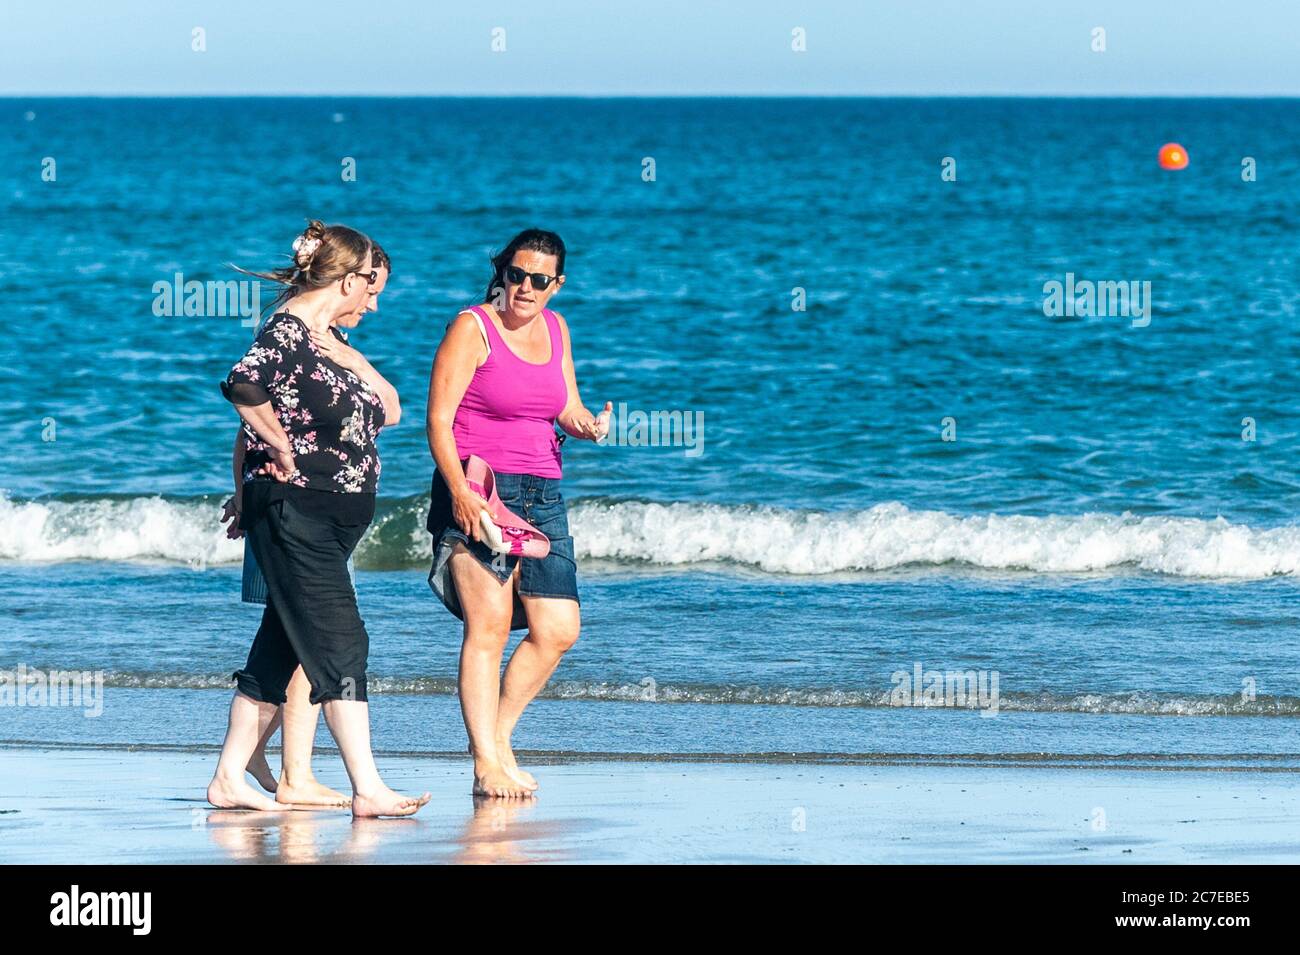 Inchydoney, West Cork, Ireland. 16th July, 2020. Inchydoney was a hive of activity this evening as many locals and tourists descended on the beach to make the most of the good weather. Credit: AG News/Alamy Live News Stock Photo